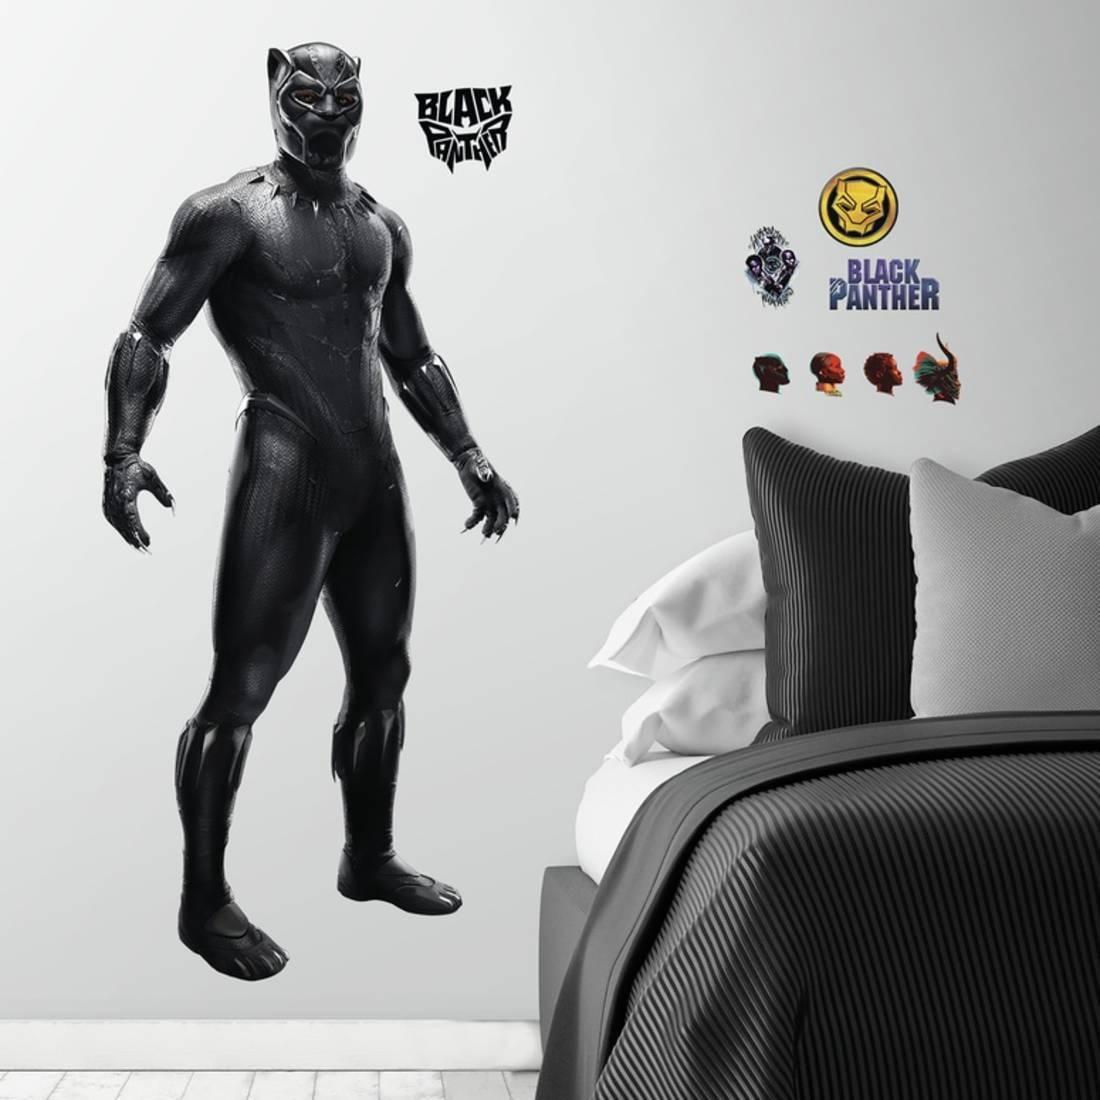 Details about   BLACK PANTHER Movie 26 Wall Decals Marvel Avengers Superhero Room Decor Stickers 